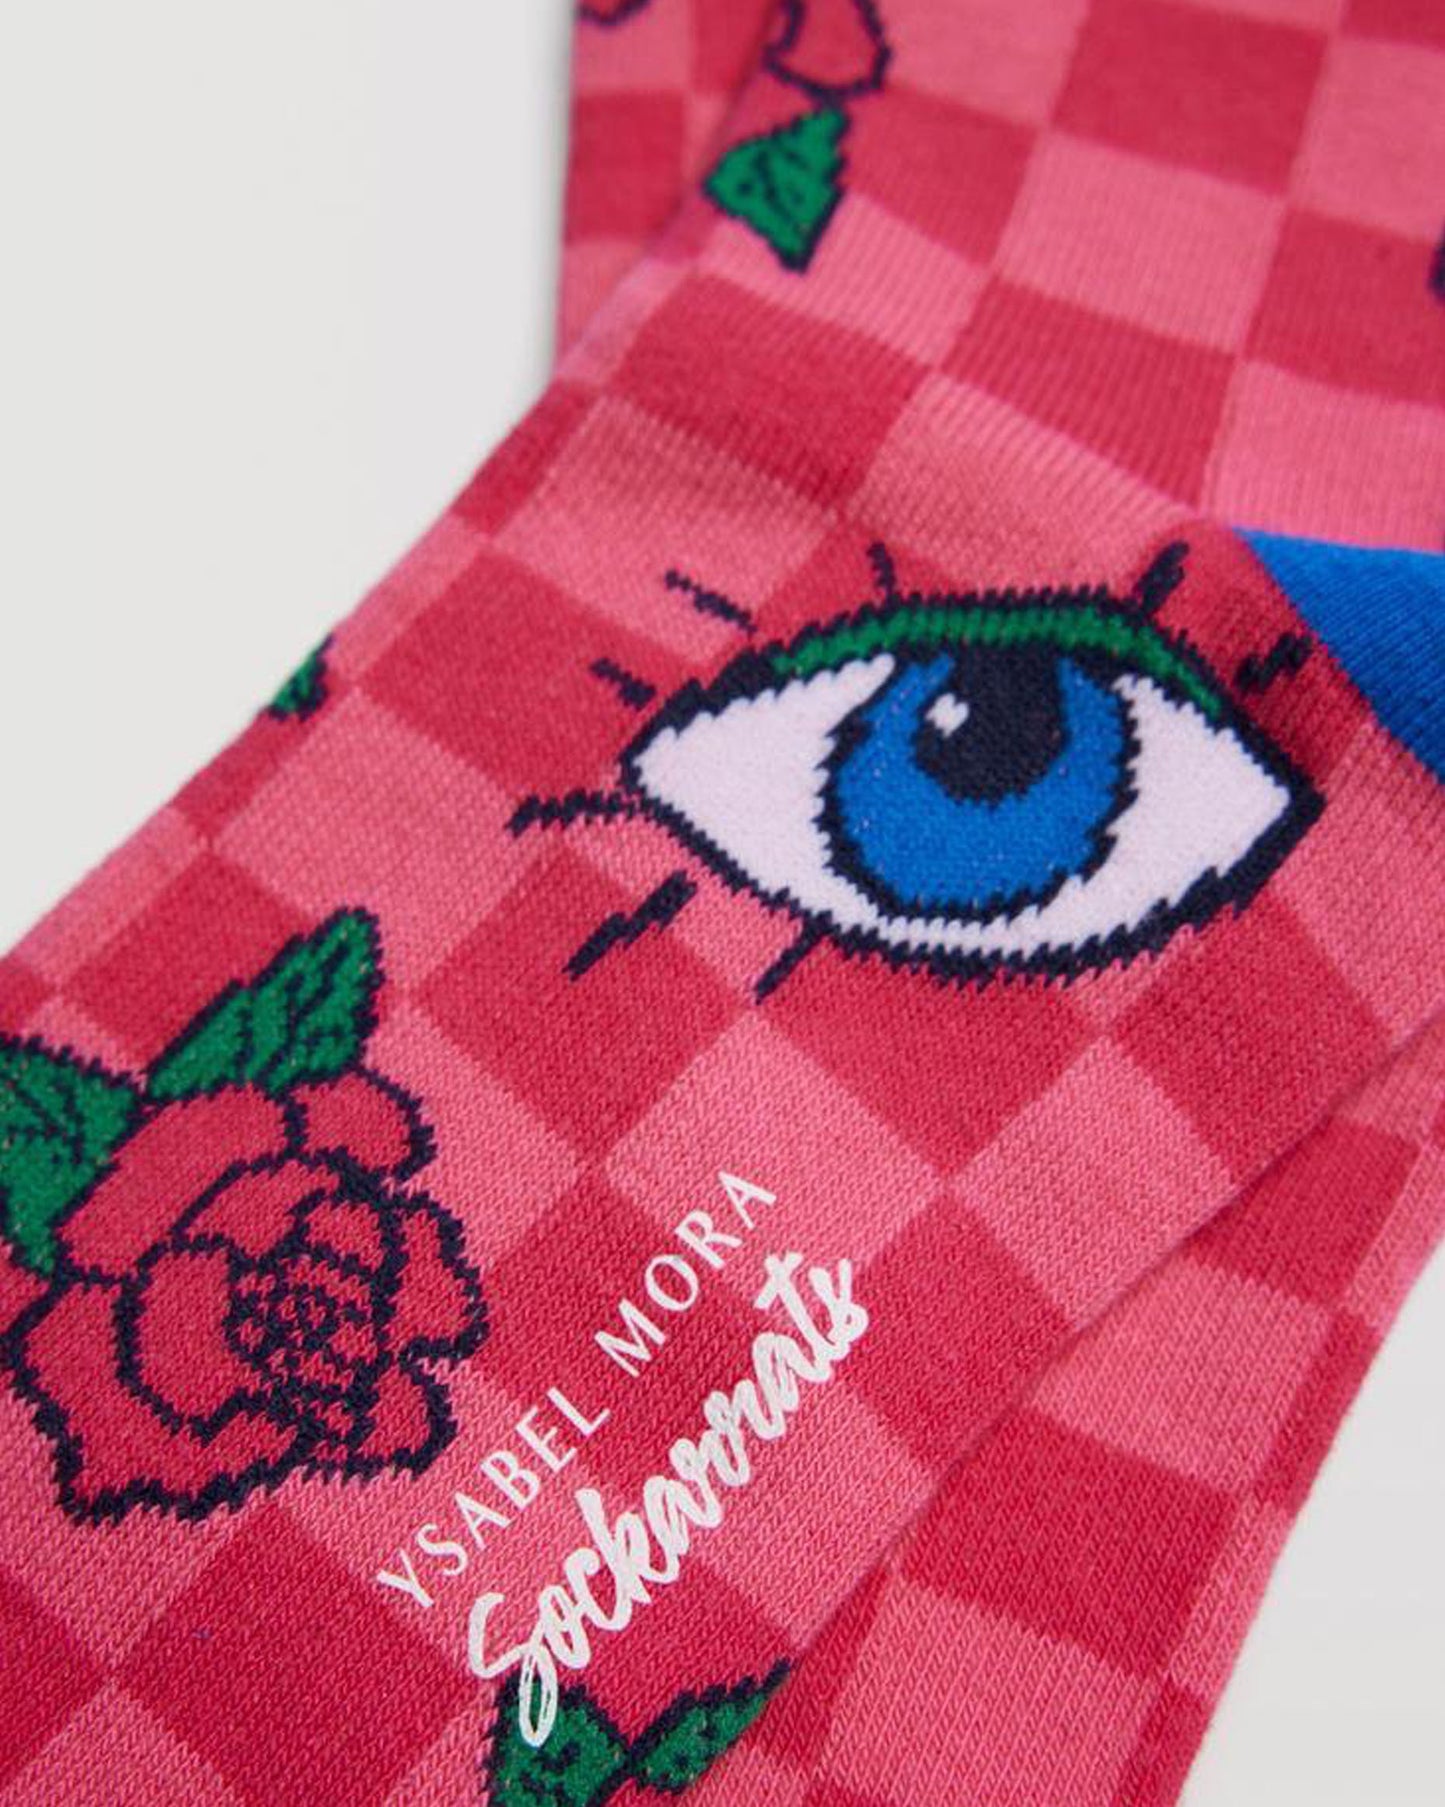 Ysabel Mora 12906 Sockarrats Checkered Rose Socks - Two toned chess board pattern pink cotton crew length ankle socks with a rose and eyes pattern, blue heel.